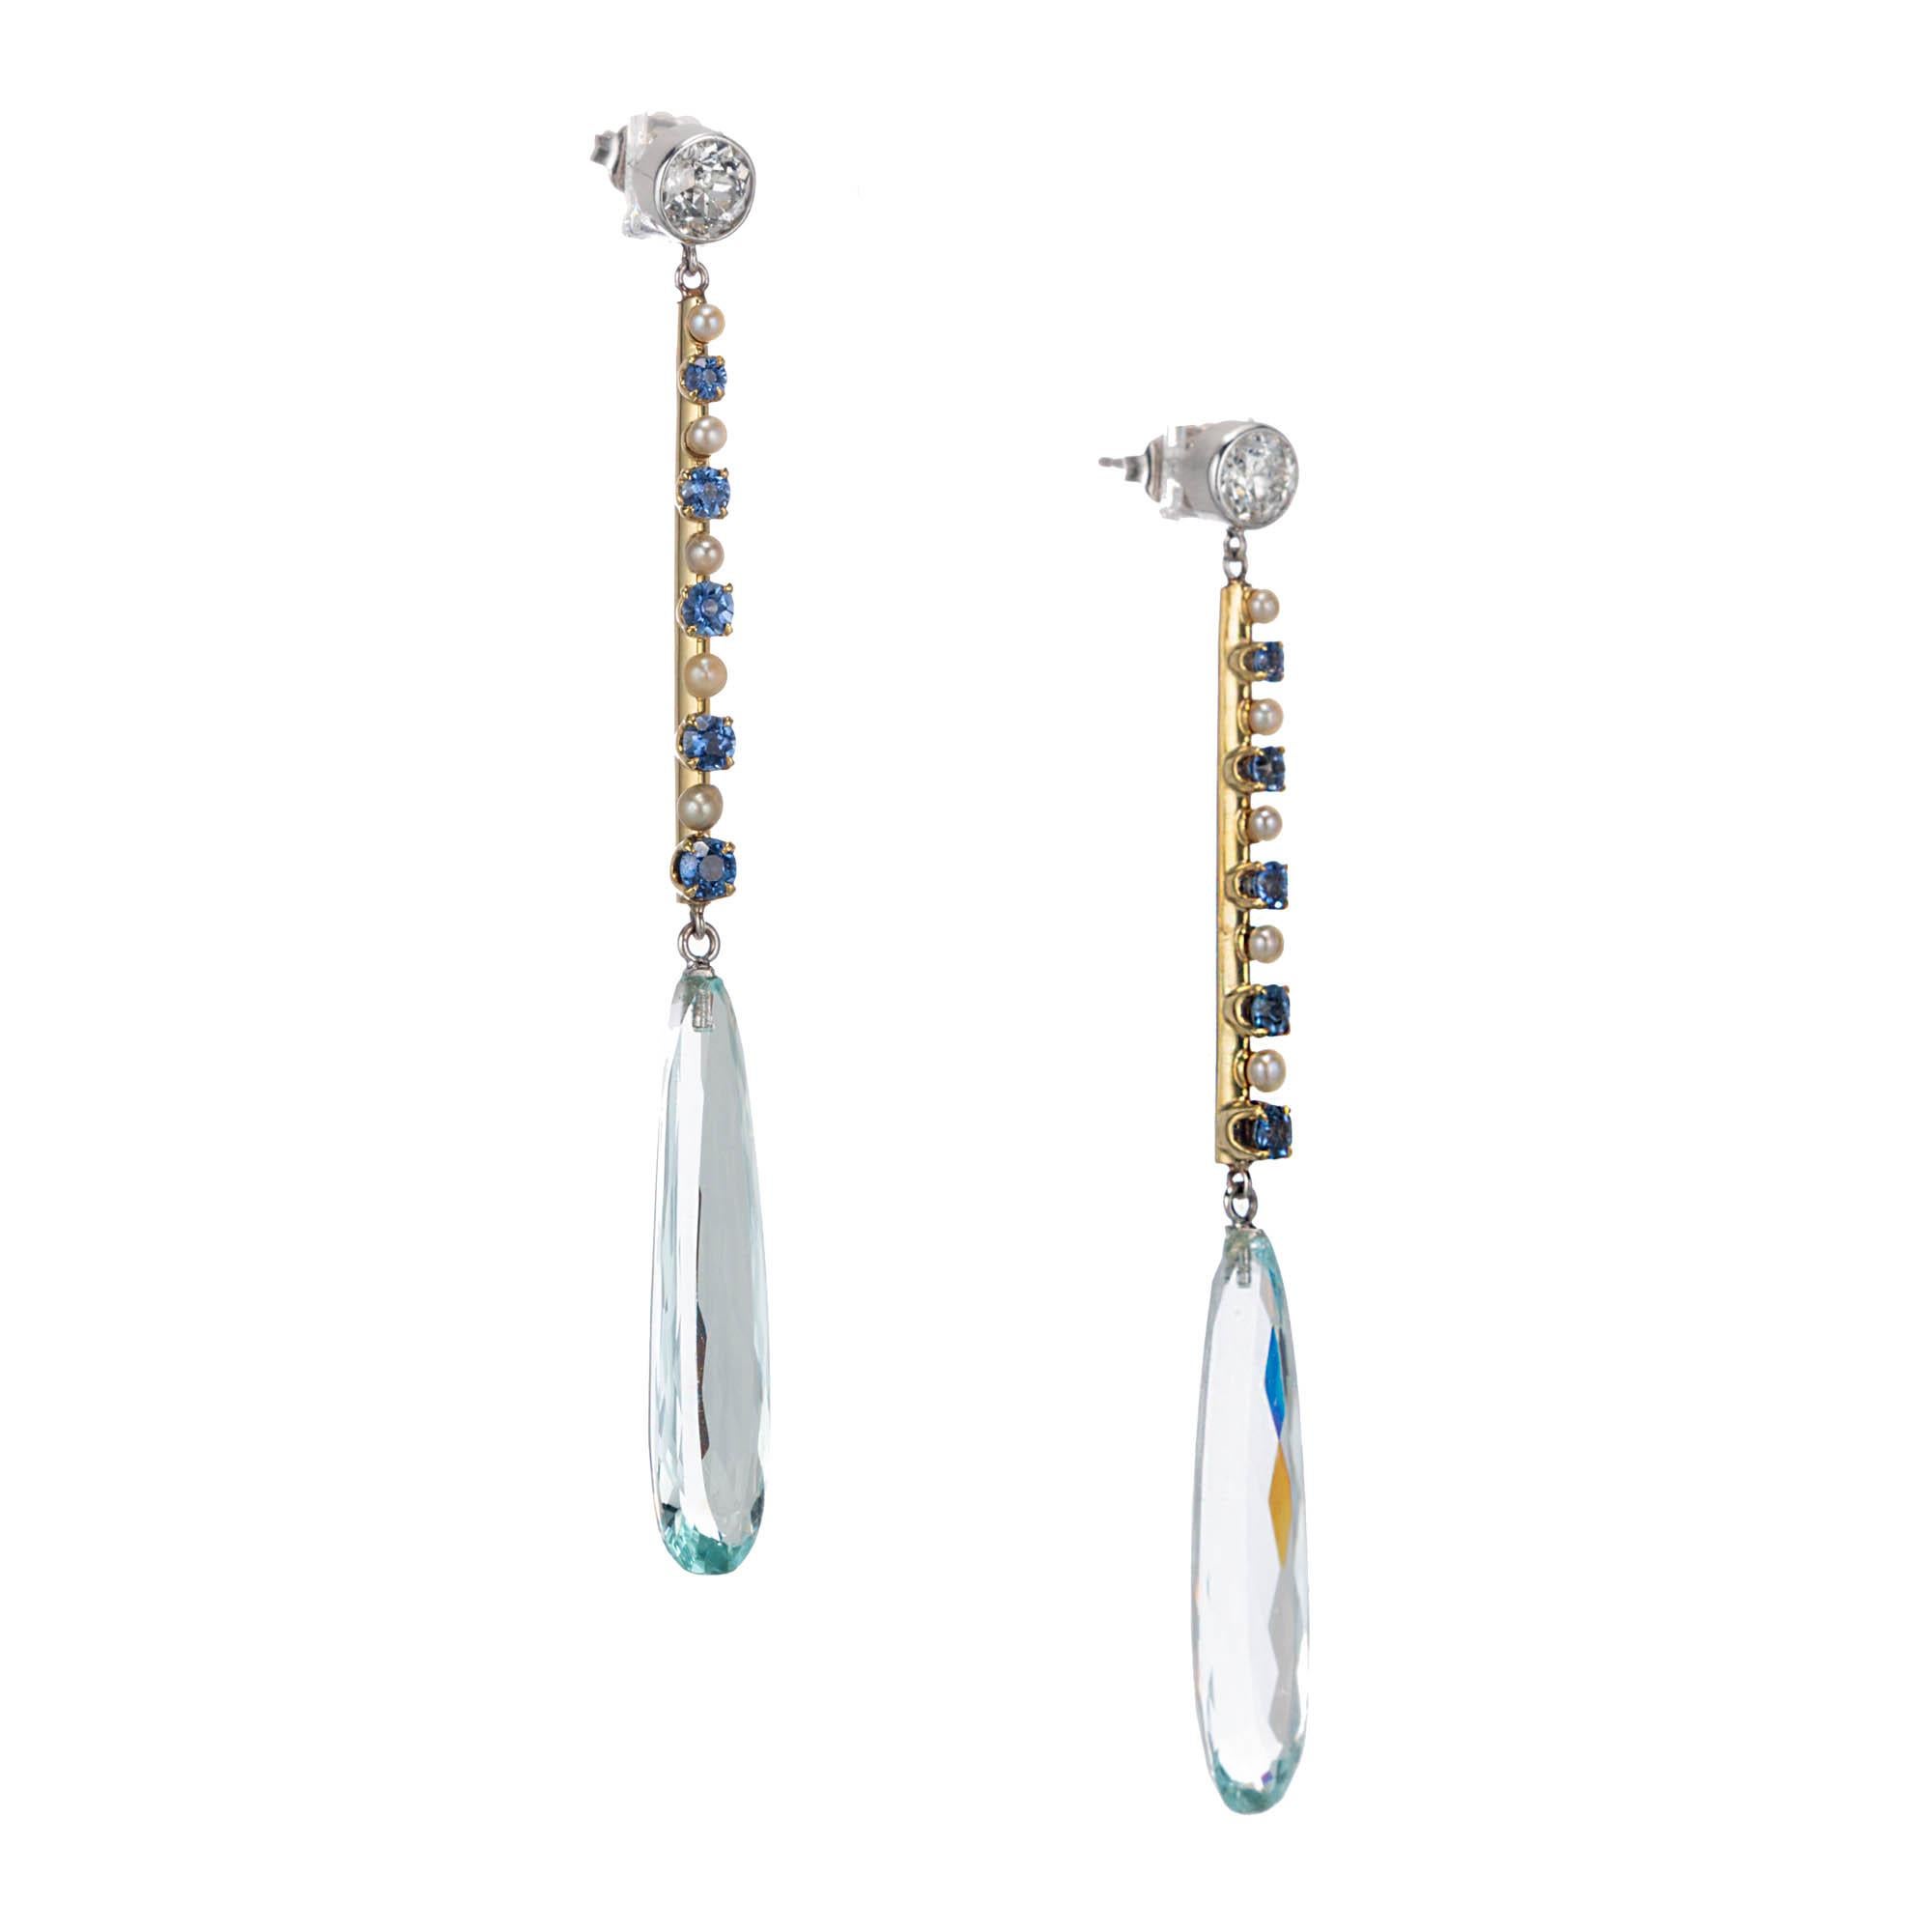 Aqua, sapphire, diamond and pearl dangle drop earrings. Set in platinum and 14k yellow white gold. Old European cut diamond tops in platinum. Center section in yellow gold with natural Montana sapphires and natural pearls. Two modified pear shaped